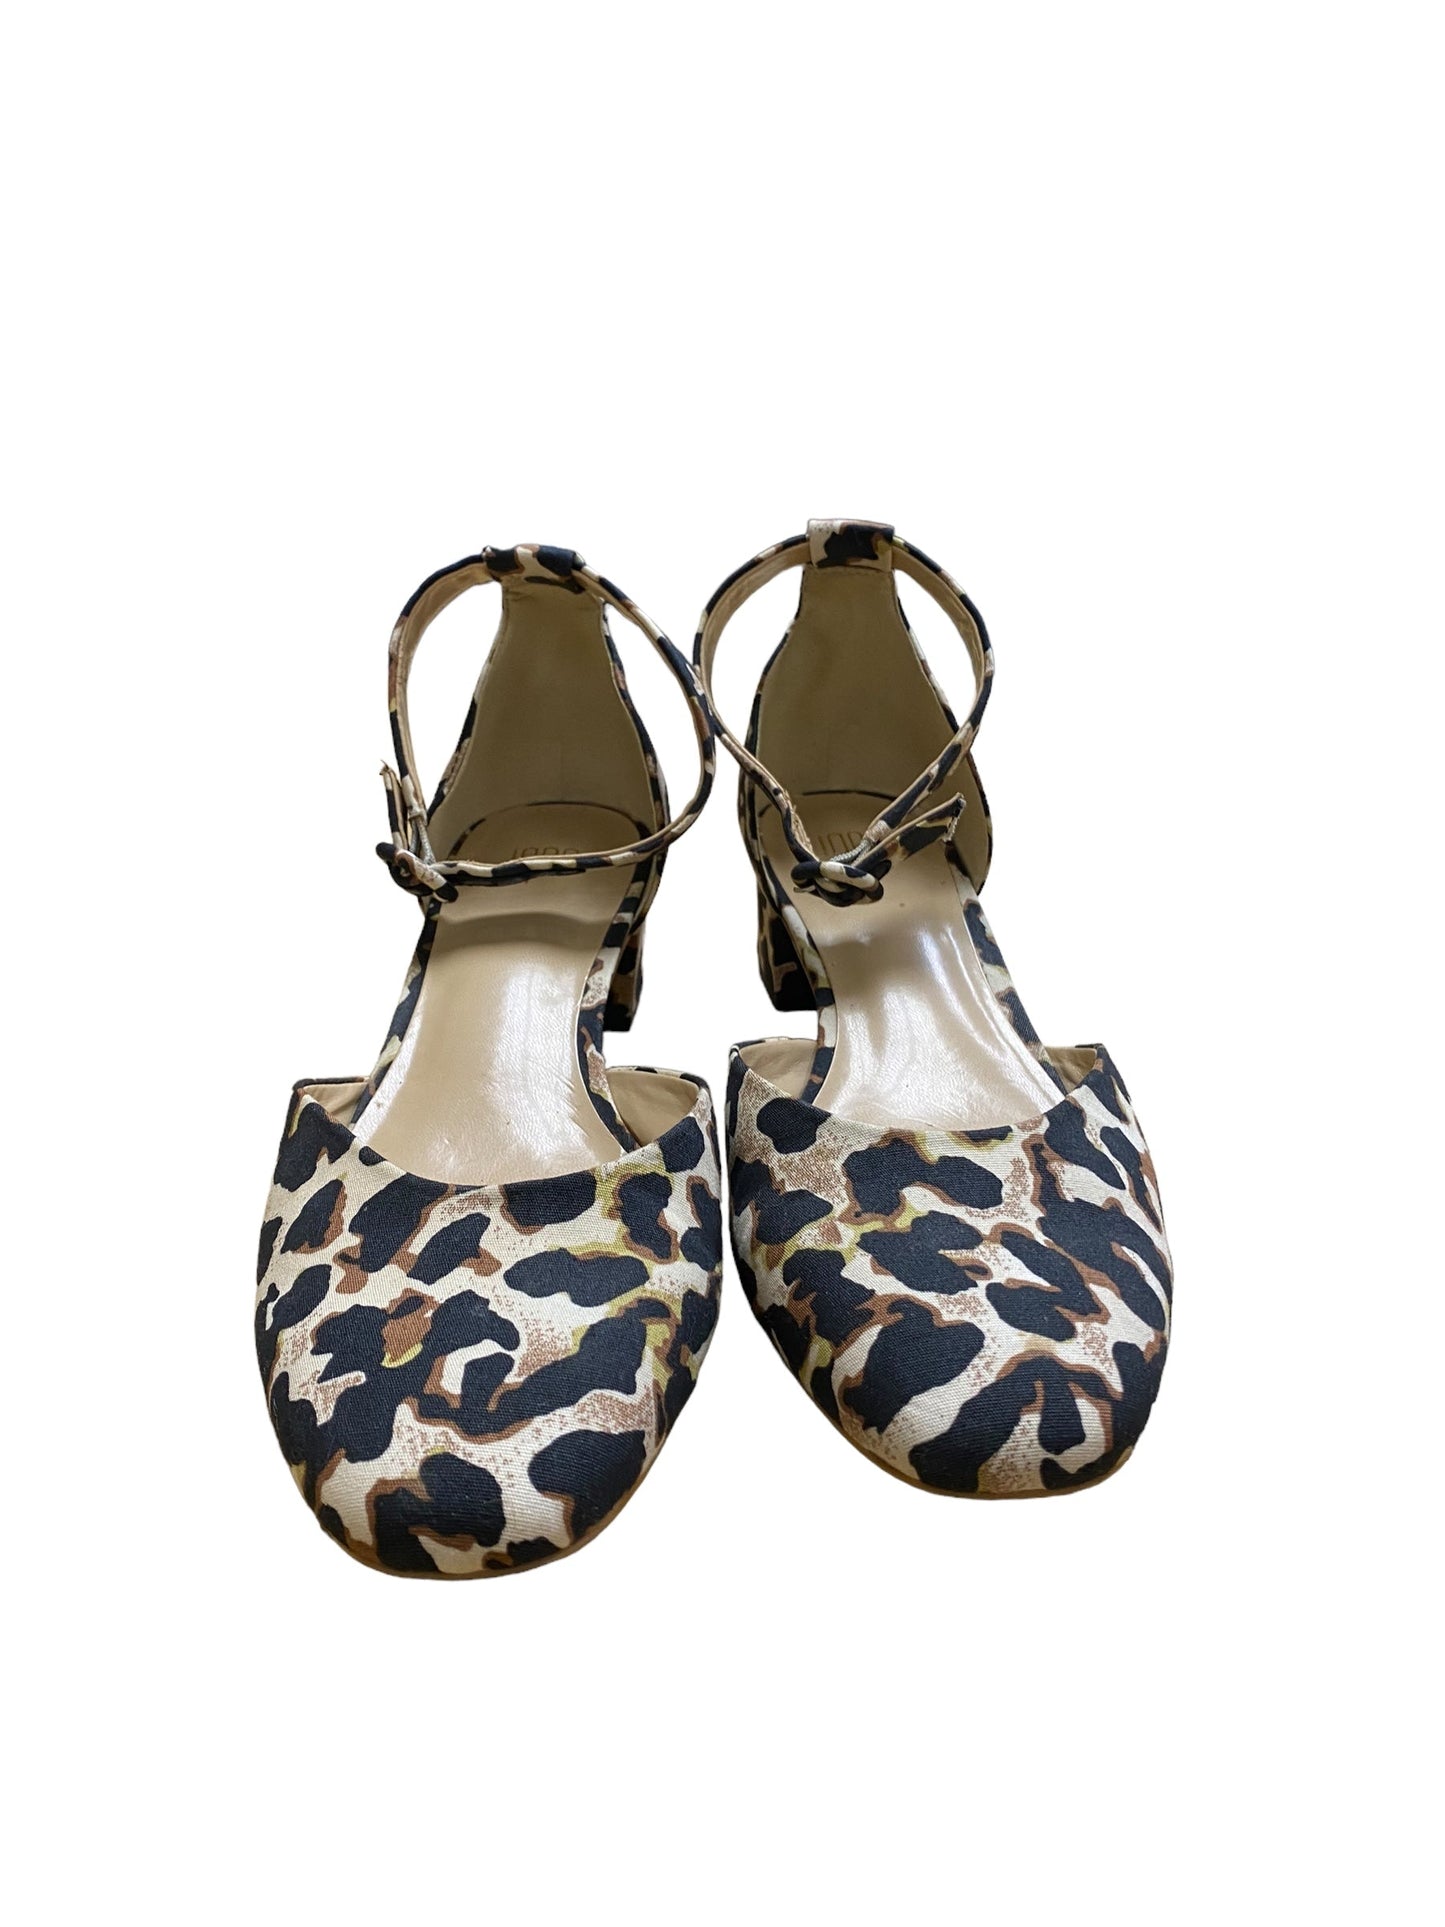 Shoes Heels Block By Cabi  Size: 9